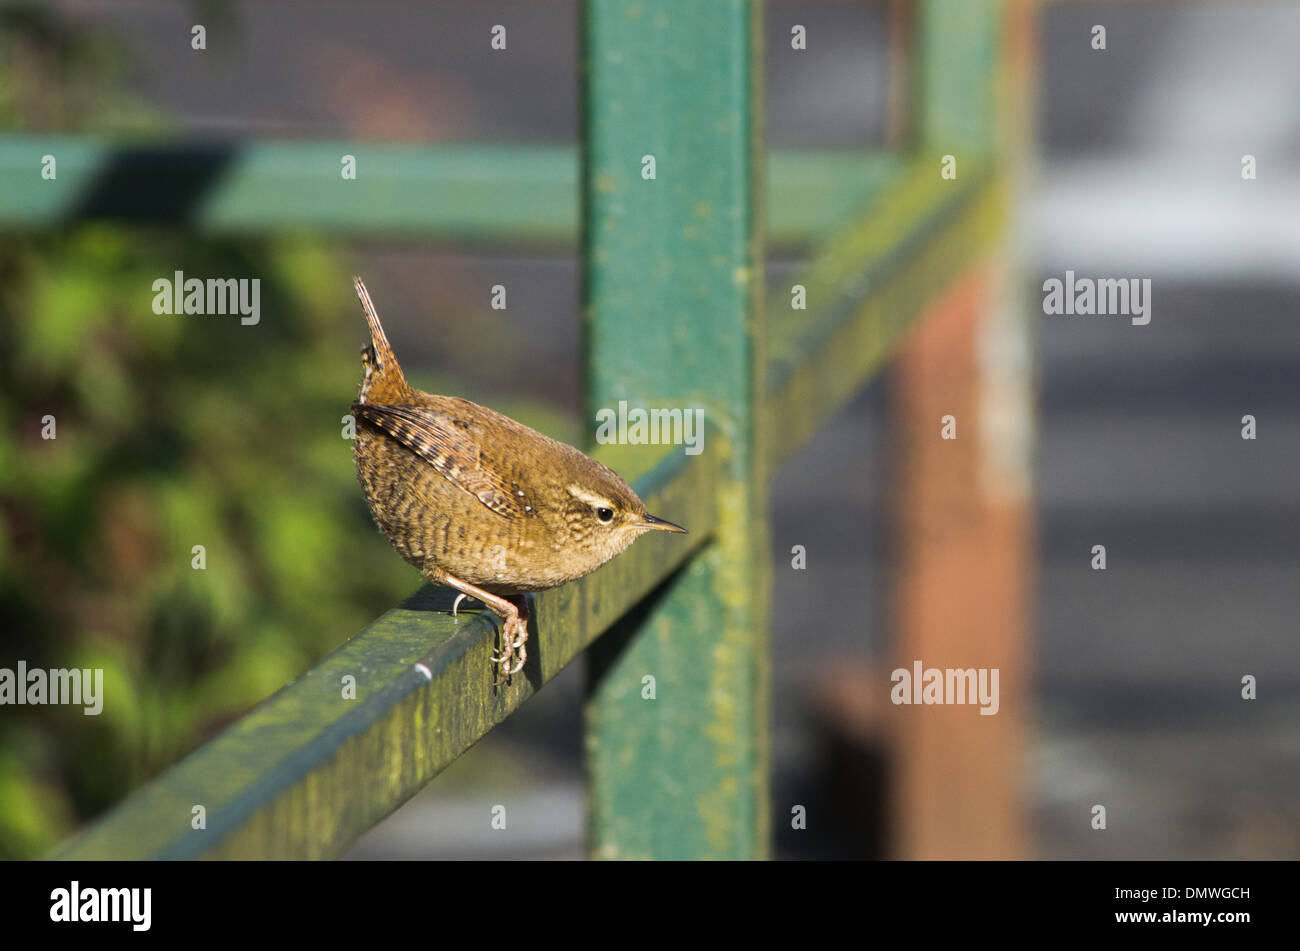 A tiny bird wren sitting on a metal frame of a fence in bright sunshine. Stock Photo